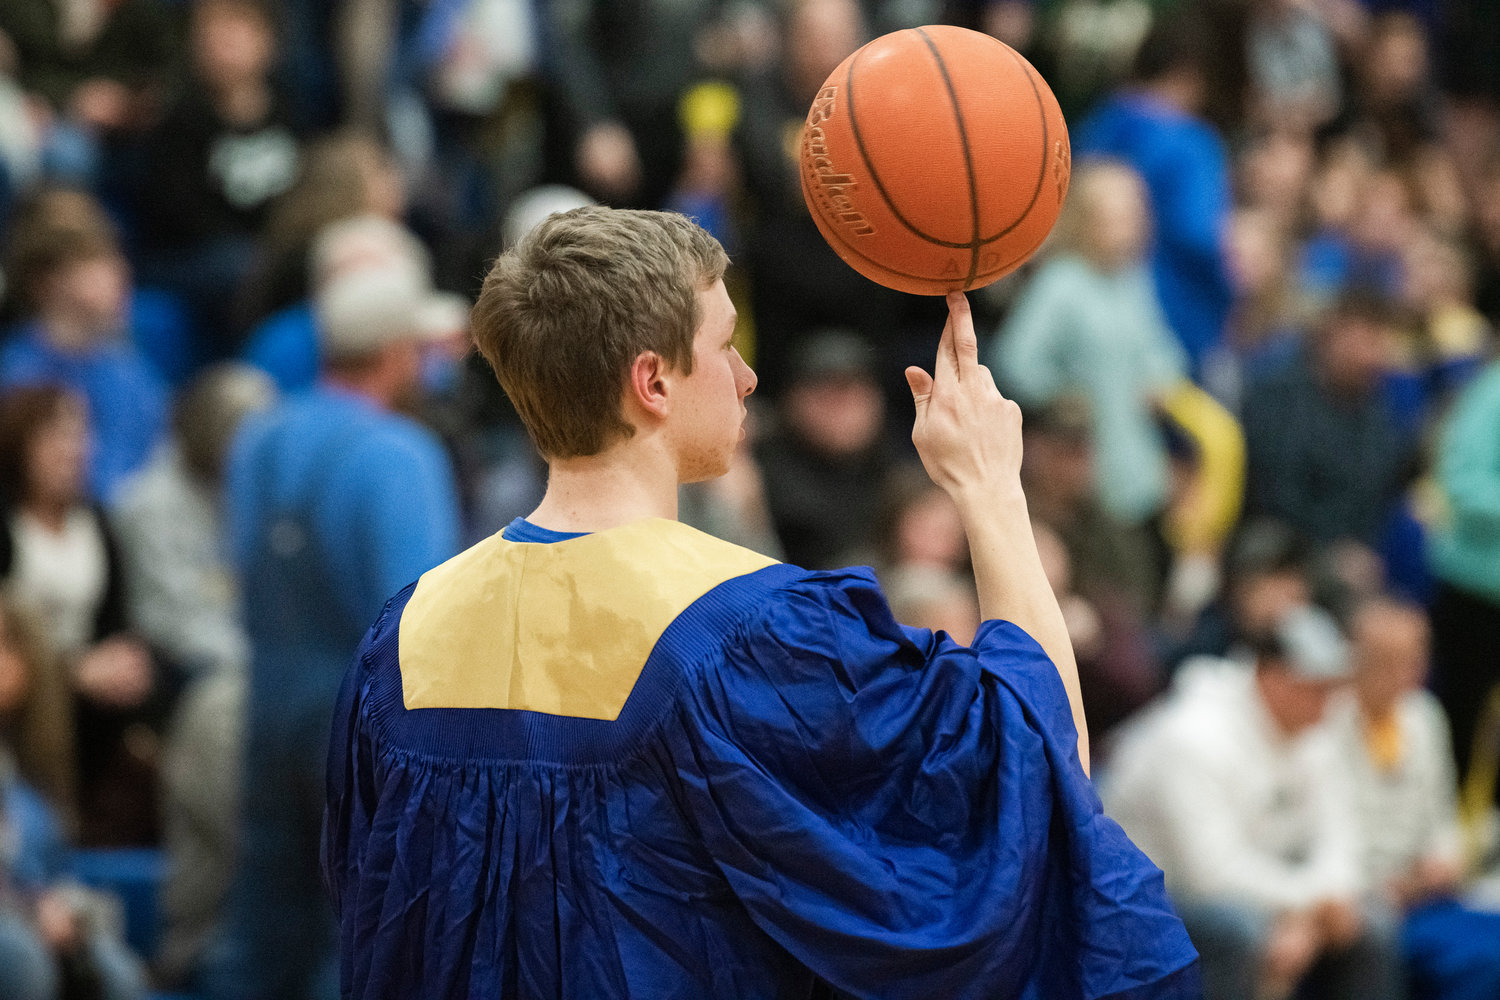 A student spins a basketball on his finger during a break in a game on Thursday in Adna.